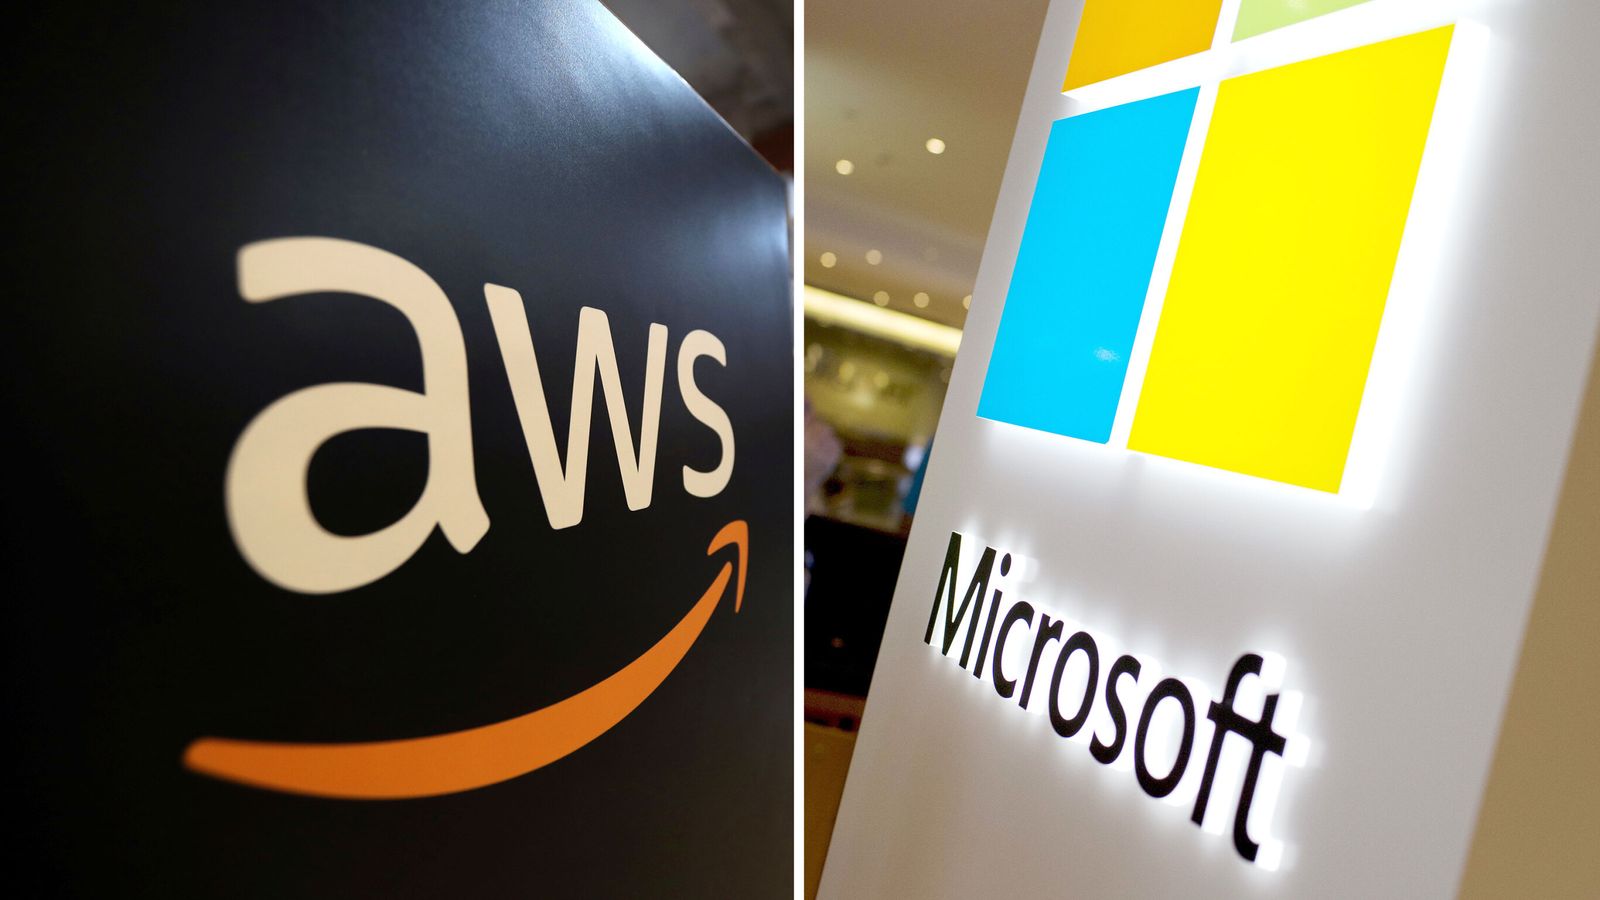 Amazon and Microsoft's dominance in cloud services market 'concerning', says Ofcom